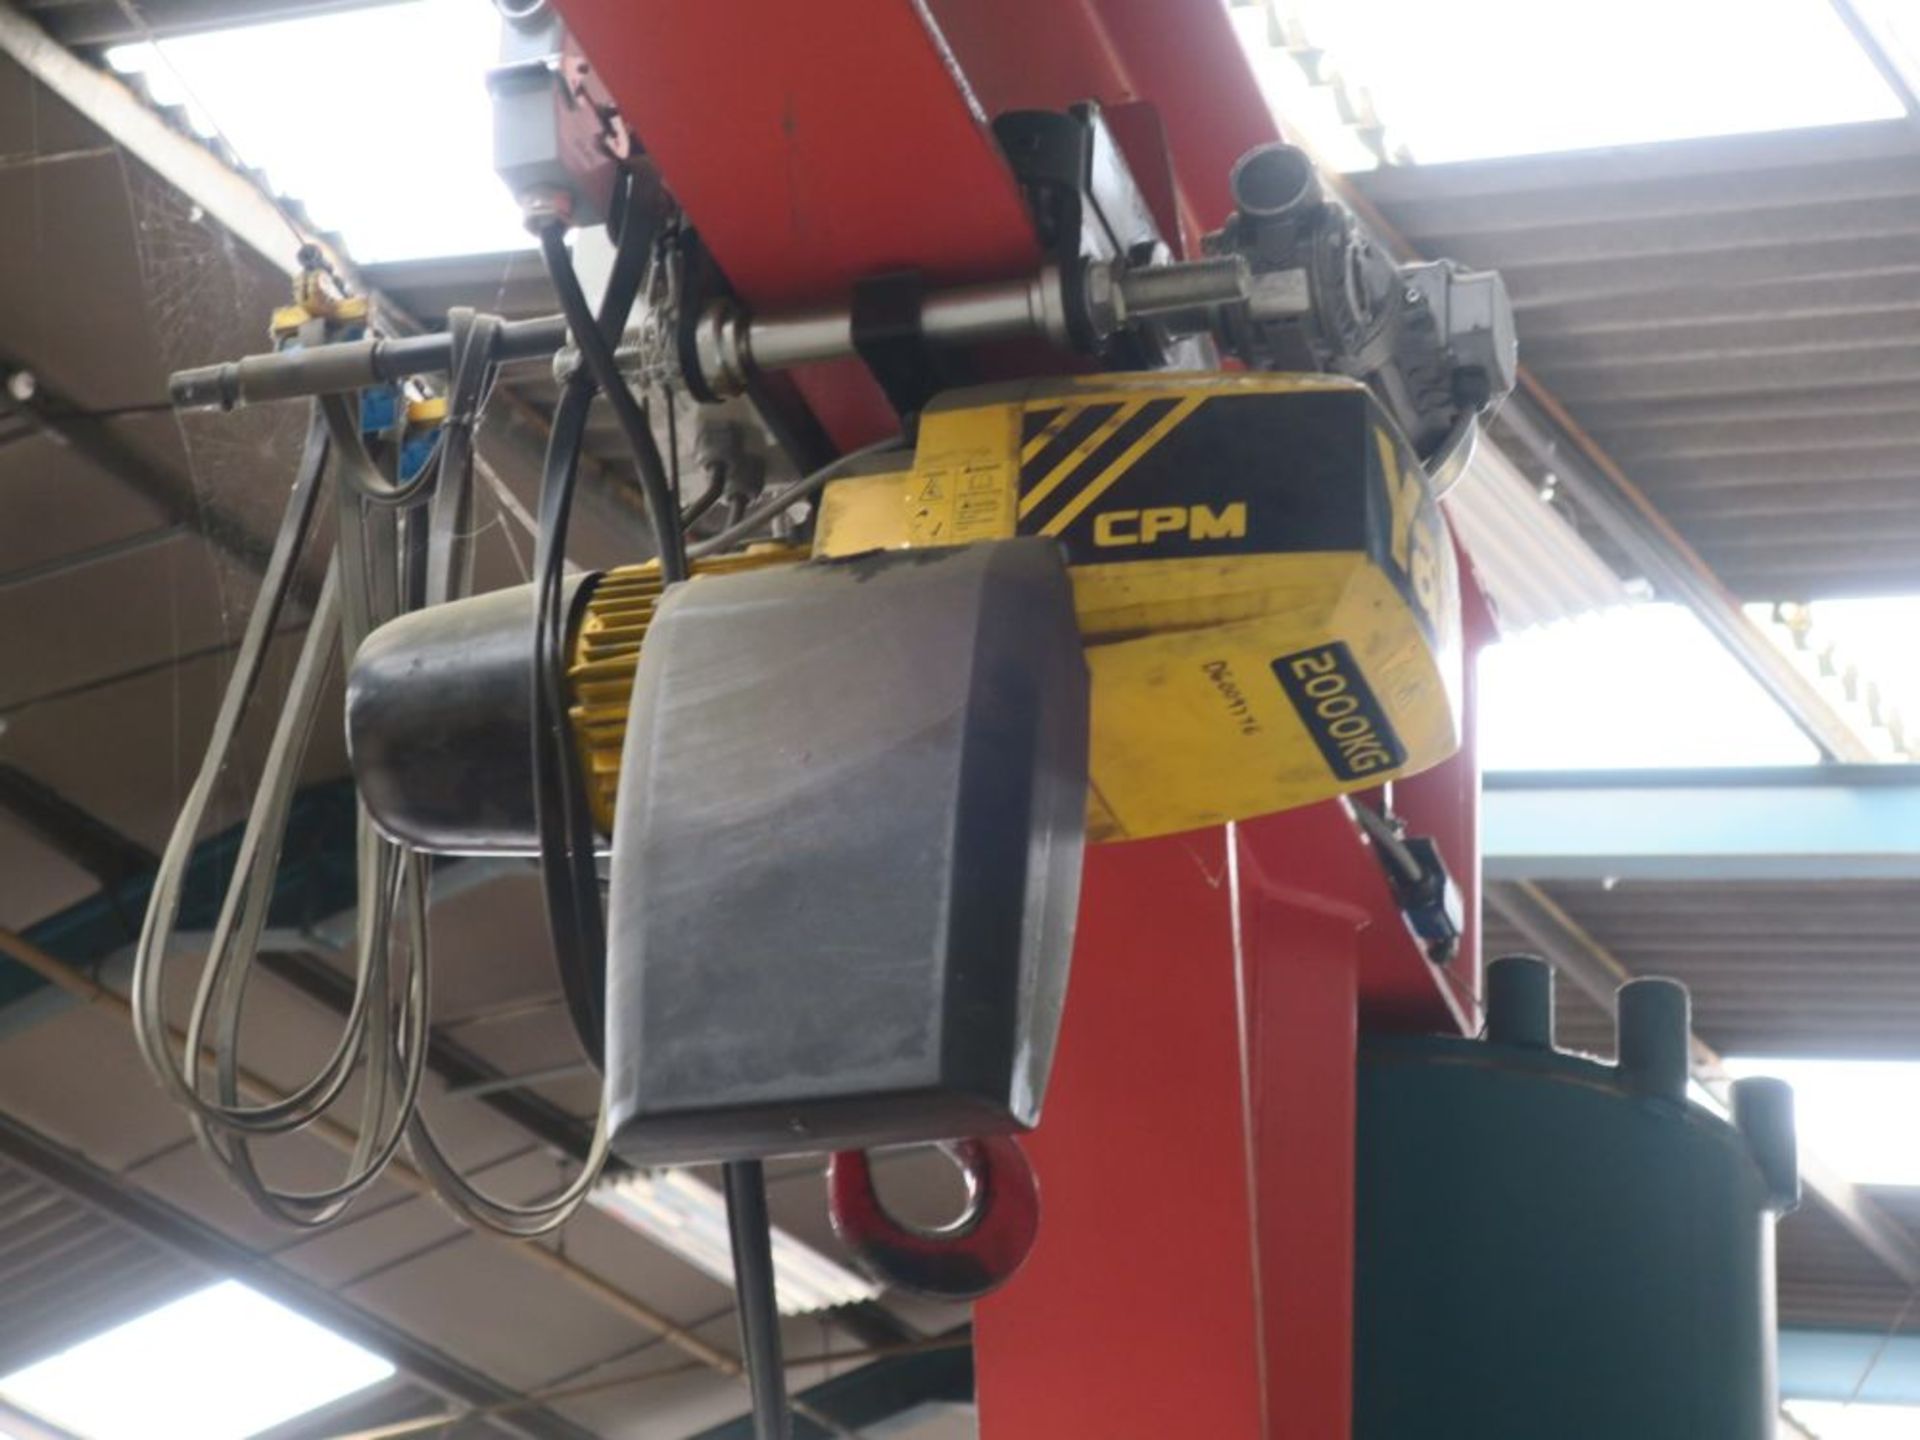 * Pelloby Free Standing Jib Crane, 2 Ton Electric Yale CPM Hoist. YOM 2007, S/N: 29251-04, Class A3. - Image 3 of 5